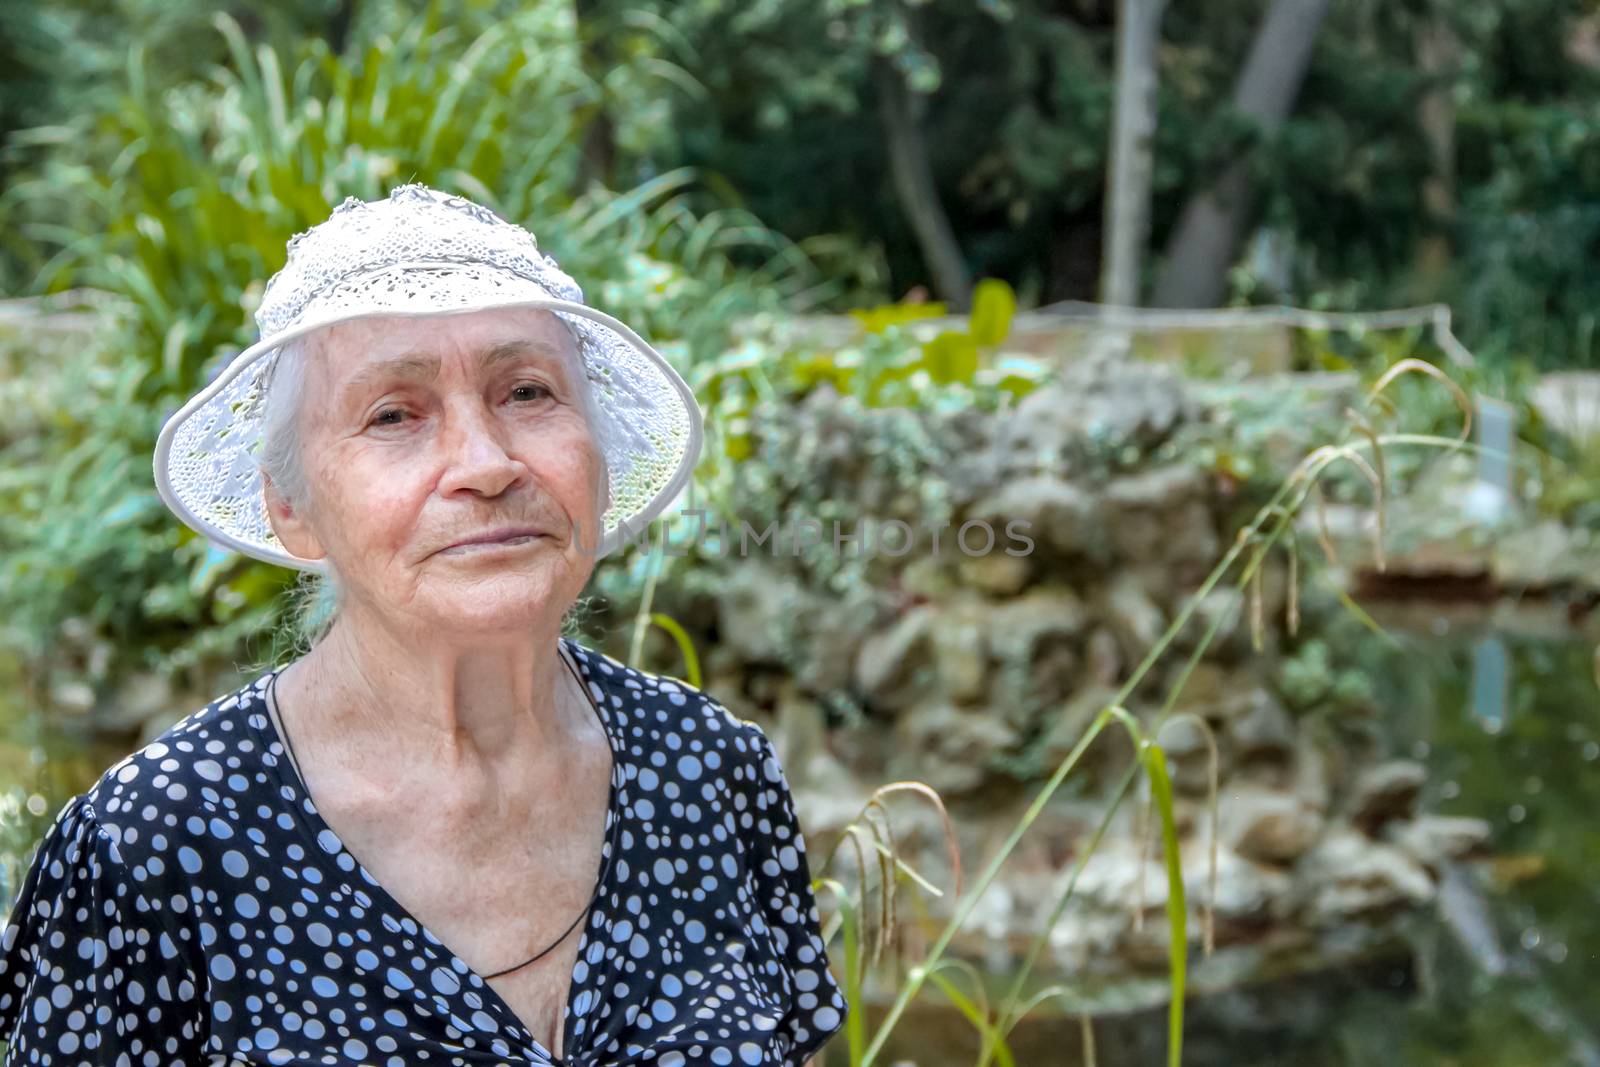 Closeup portrait of a serene senior woman in a knitted white hat, standing outside in summer